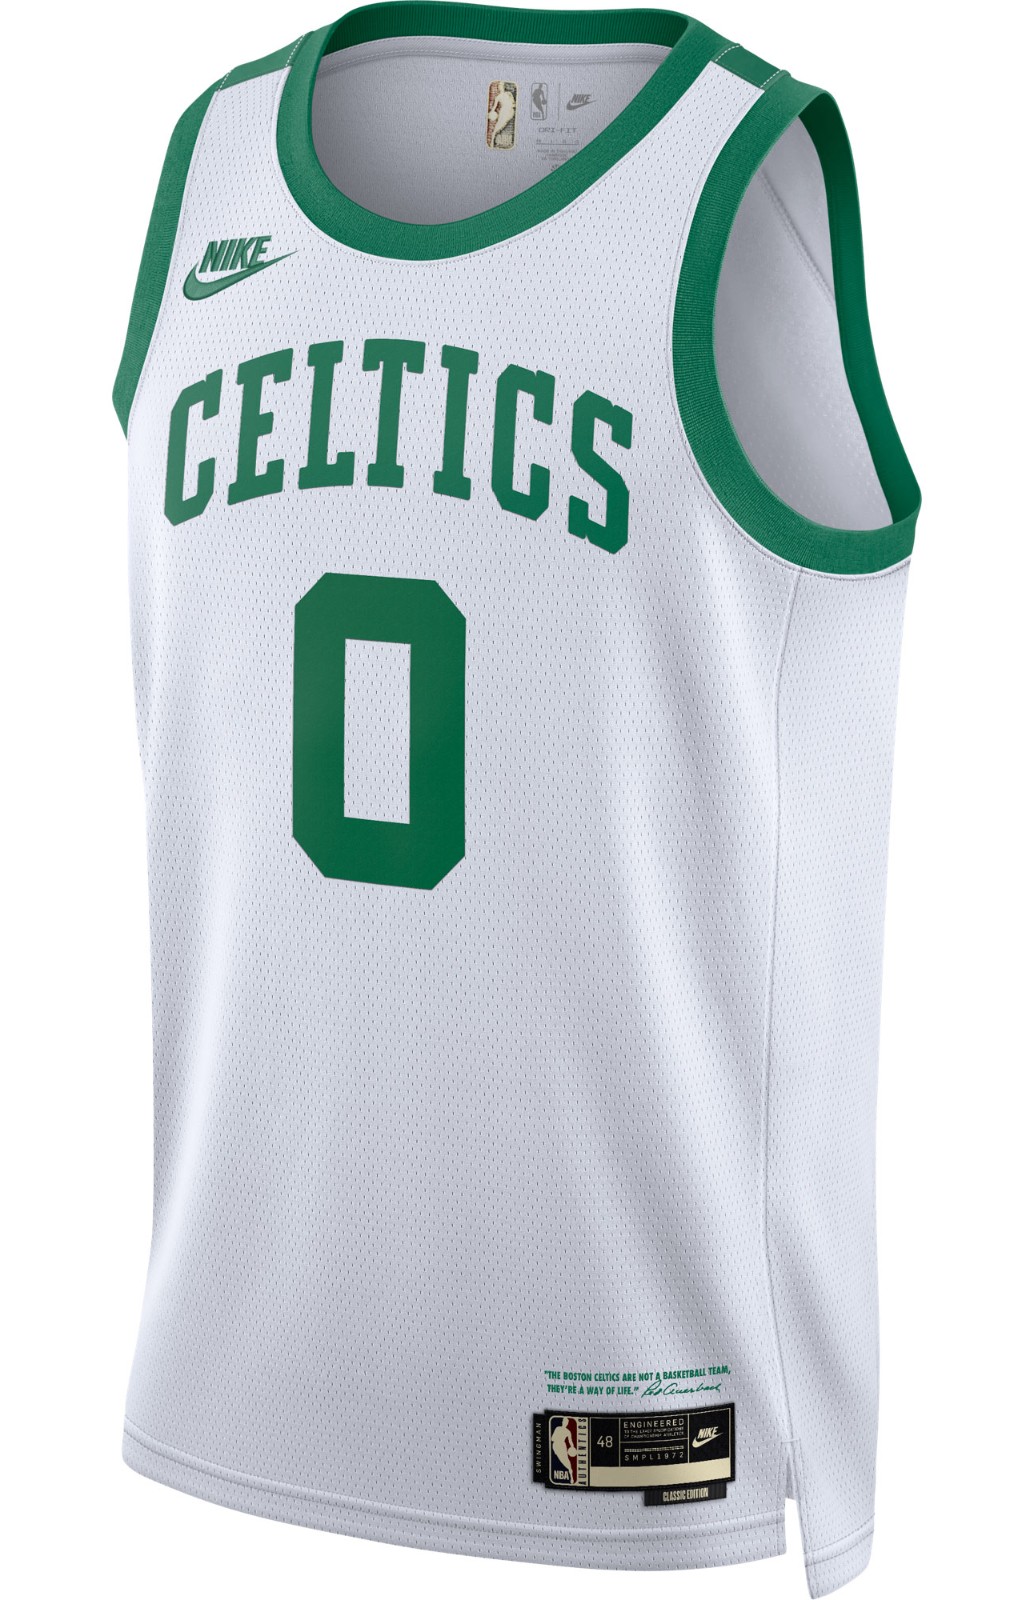 Celtics release jerseys for 2021-22, including NBA 75th anniversary